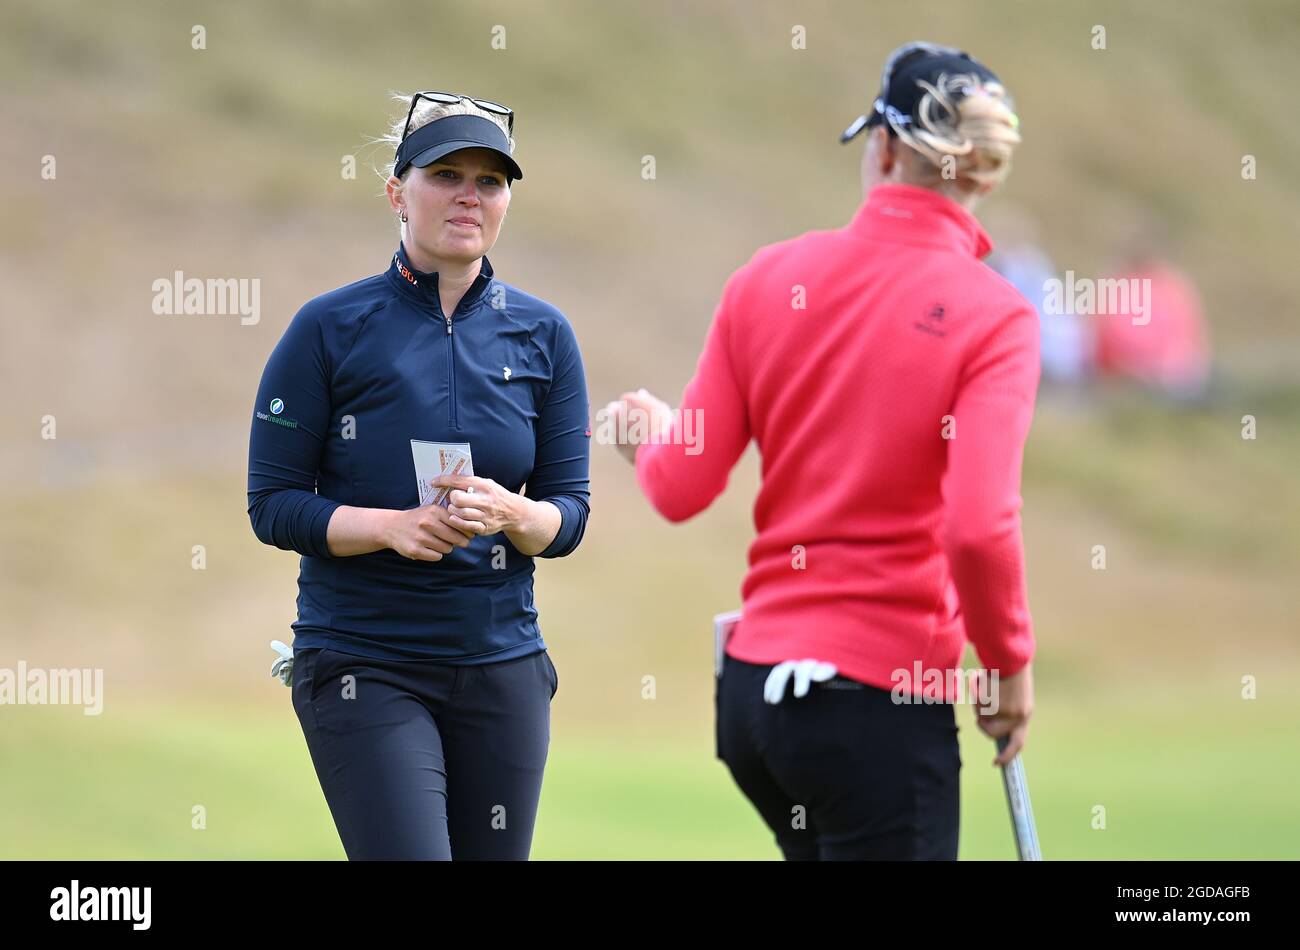 Denmark's Nanna Koerstz Madsen (left) and Sweden's Madelene Sagstrom on the 18th green during day one of the Trust Golf Women's Scottish Open at Dumbarnie Links, St Andrews. Picture date: Wednesday August 11, 2021. Stock Photo